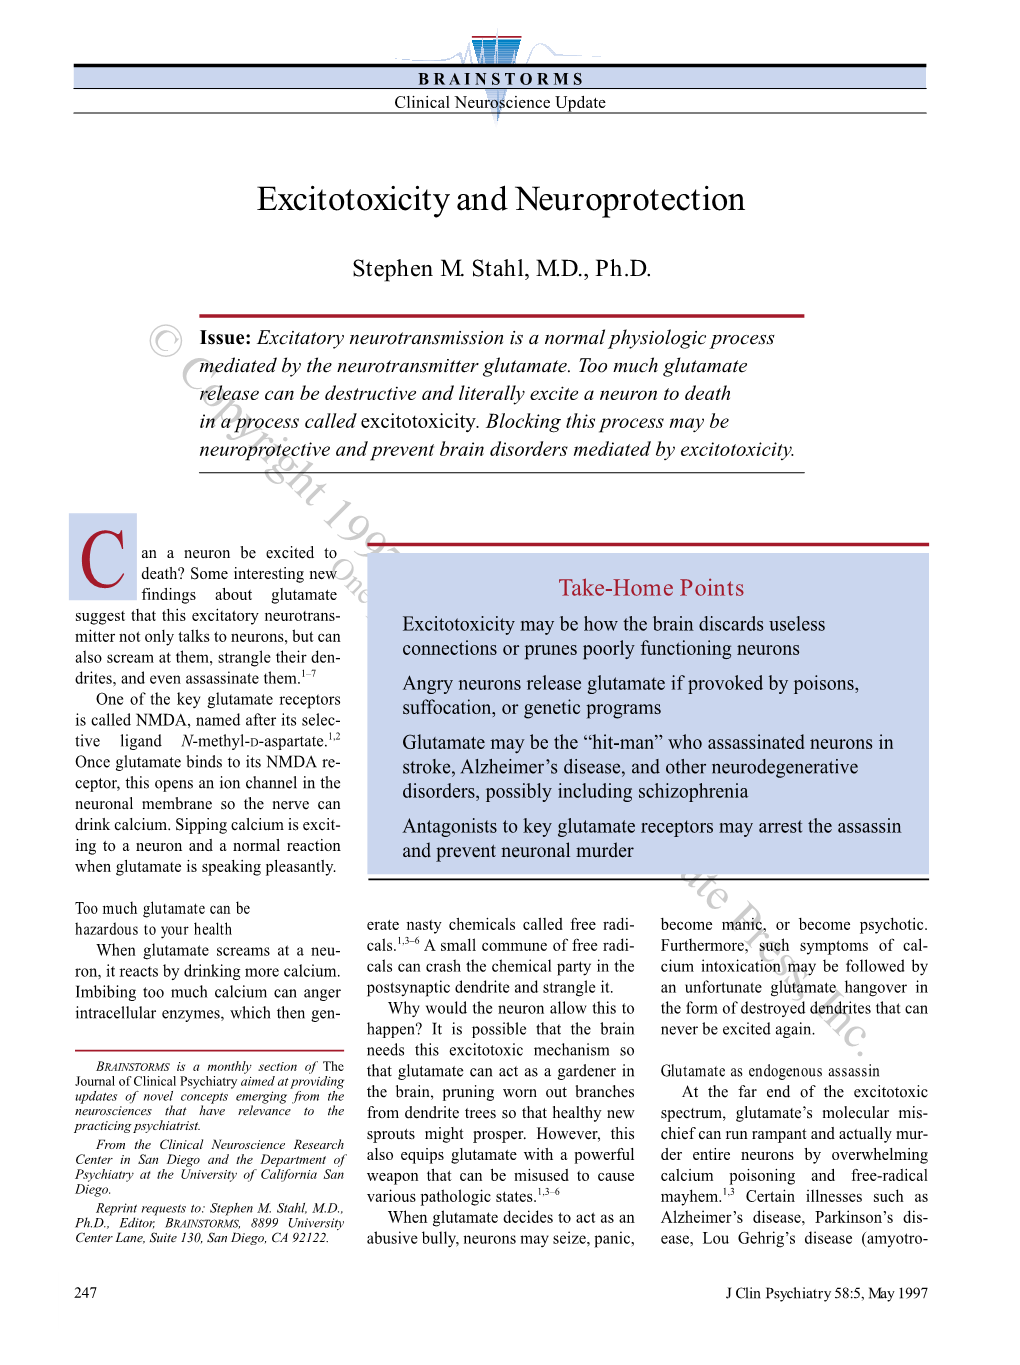 Brainstorms: Excitotoxicity and Neuroprotection